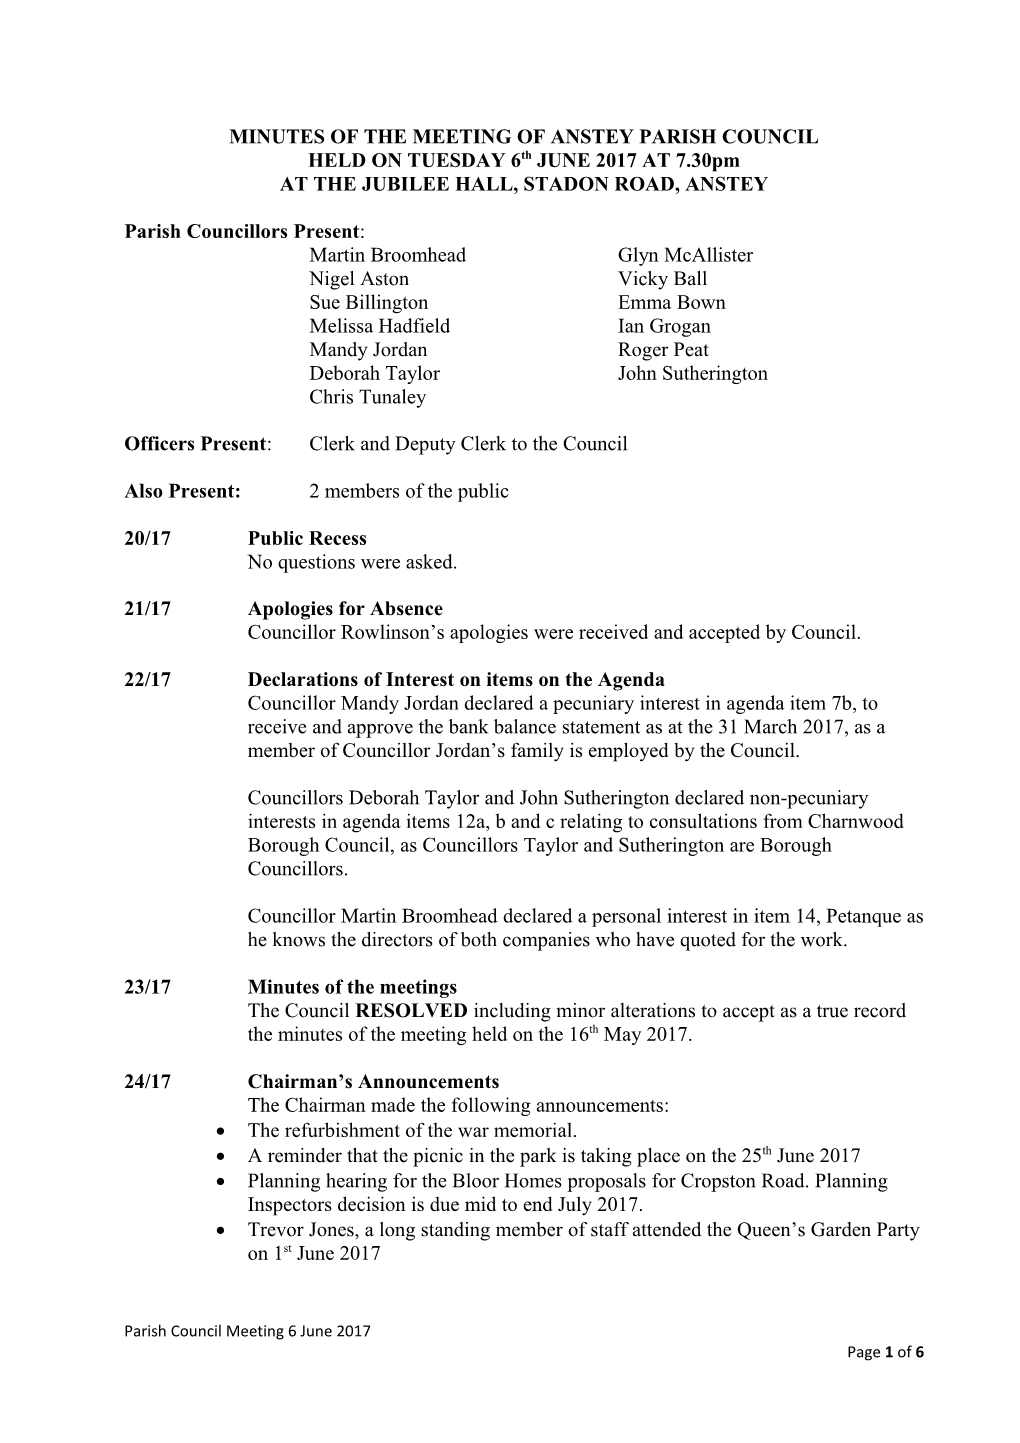 Minutes of Meeting of Anstey Parish Council